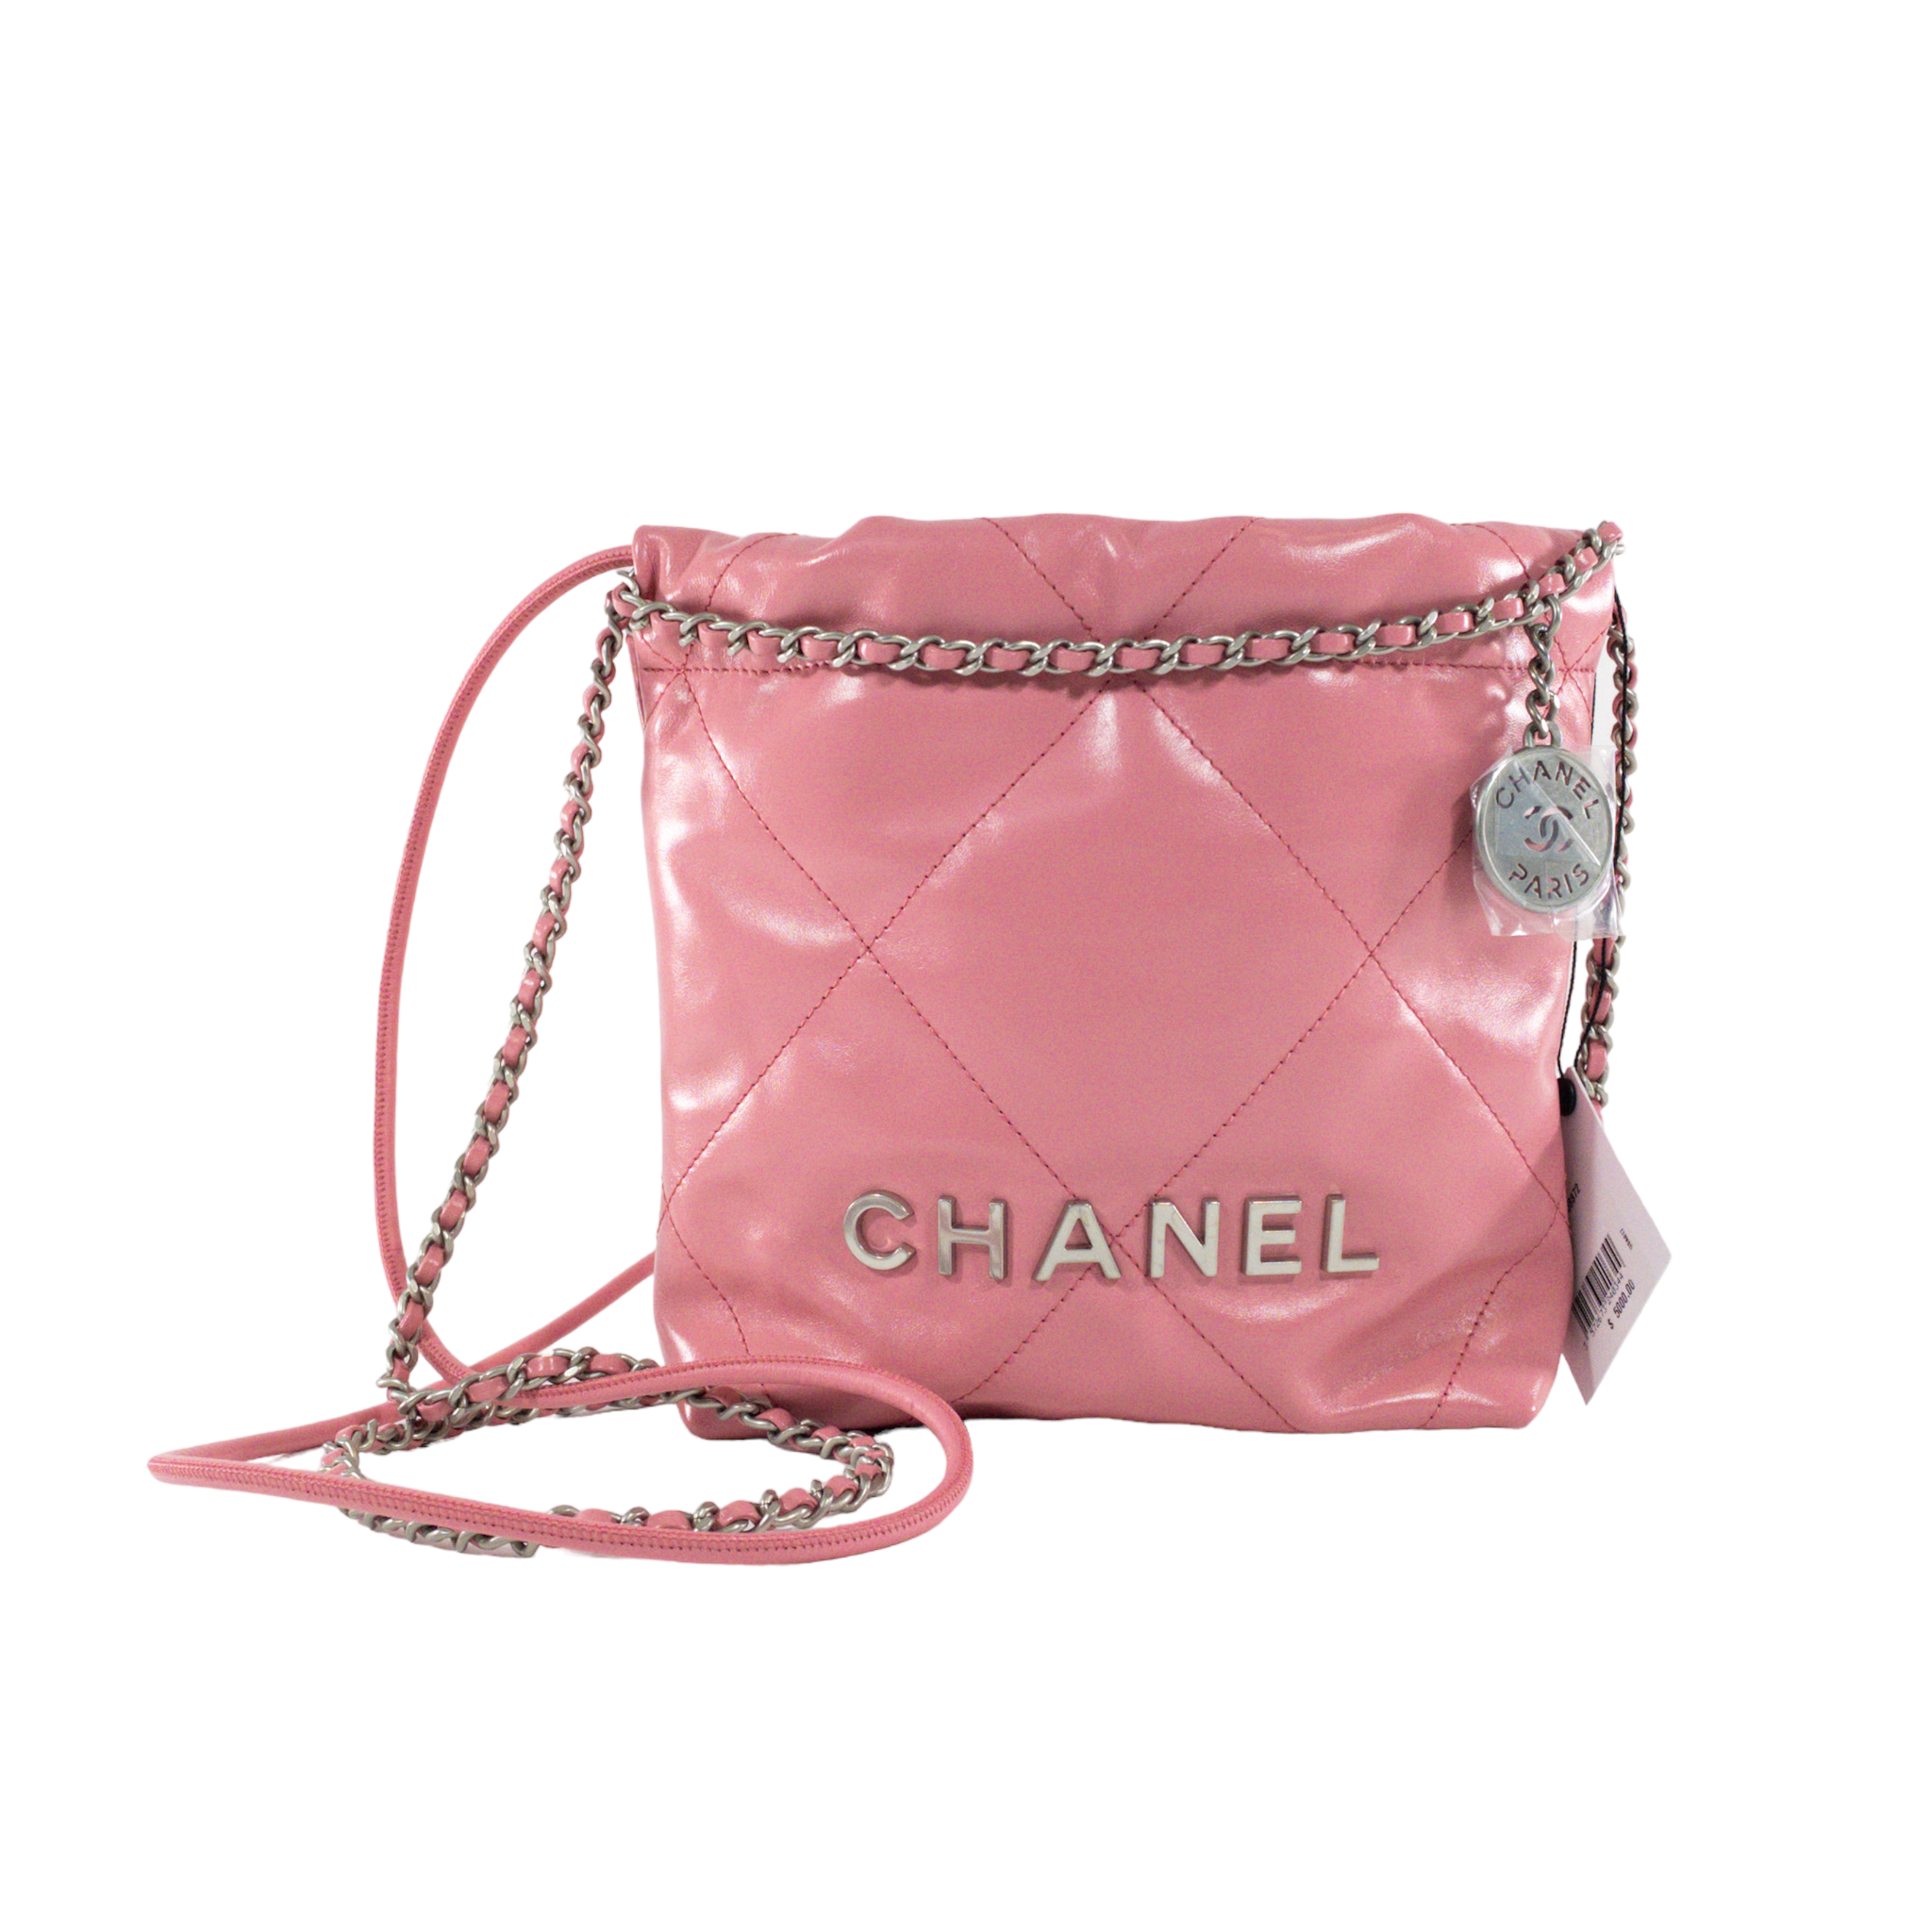 CHANEL, Bags, Chanel Pink Heart Bag Mini 22s Cc Small Lambskin Leather  Crossbody Bag New Wtag